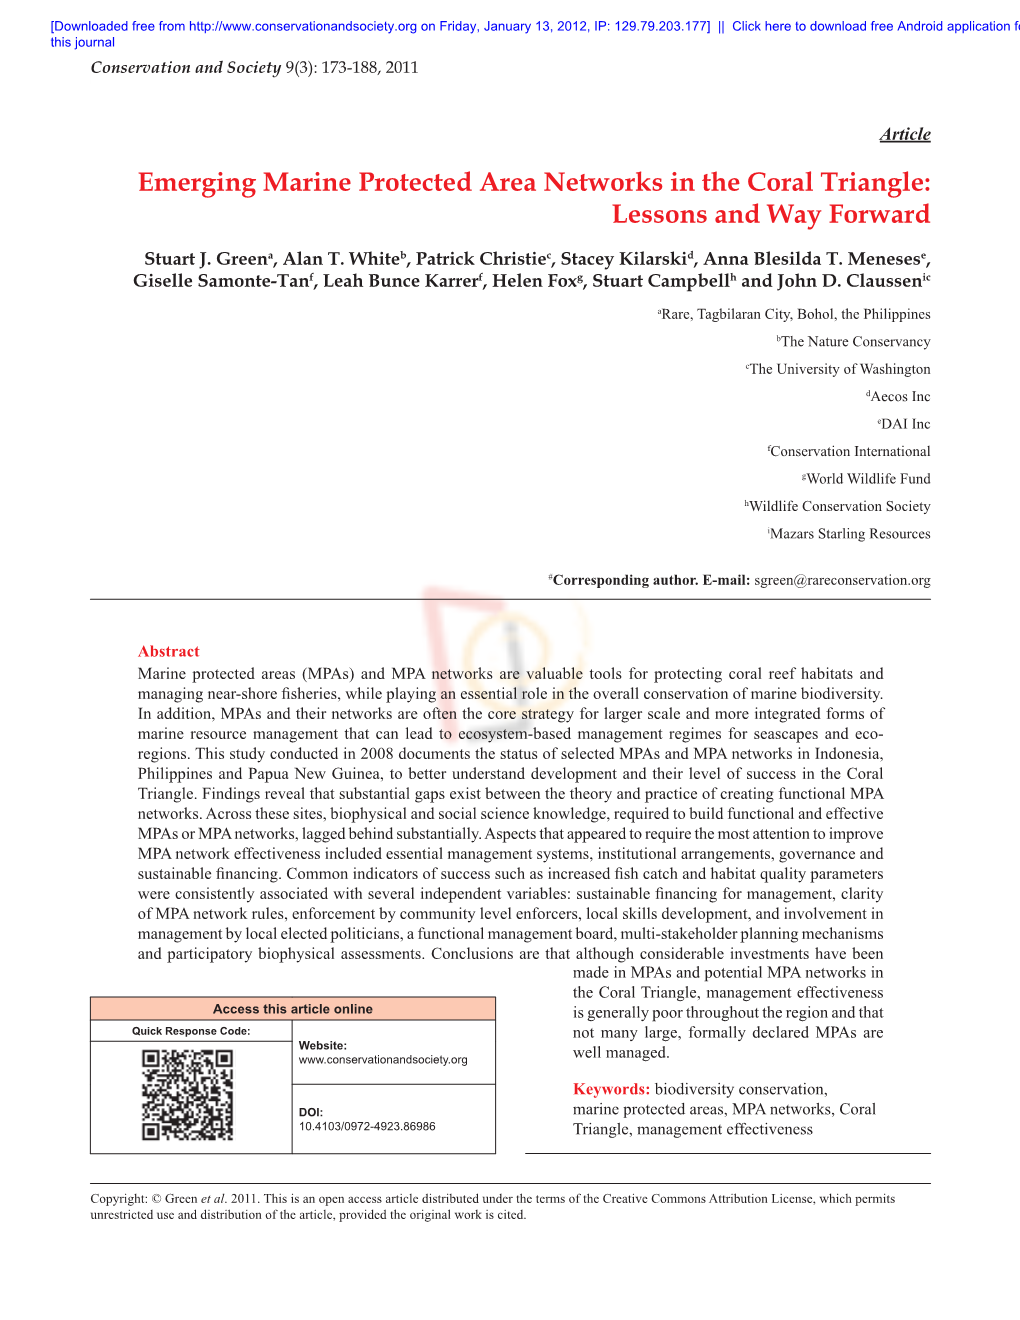 Emerging Marine Protected Area Networks in the Coral Triangle: Lessons and Way Forward